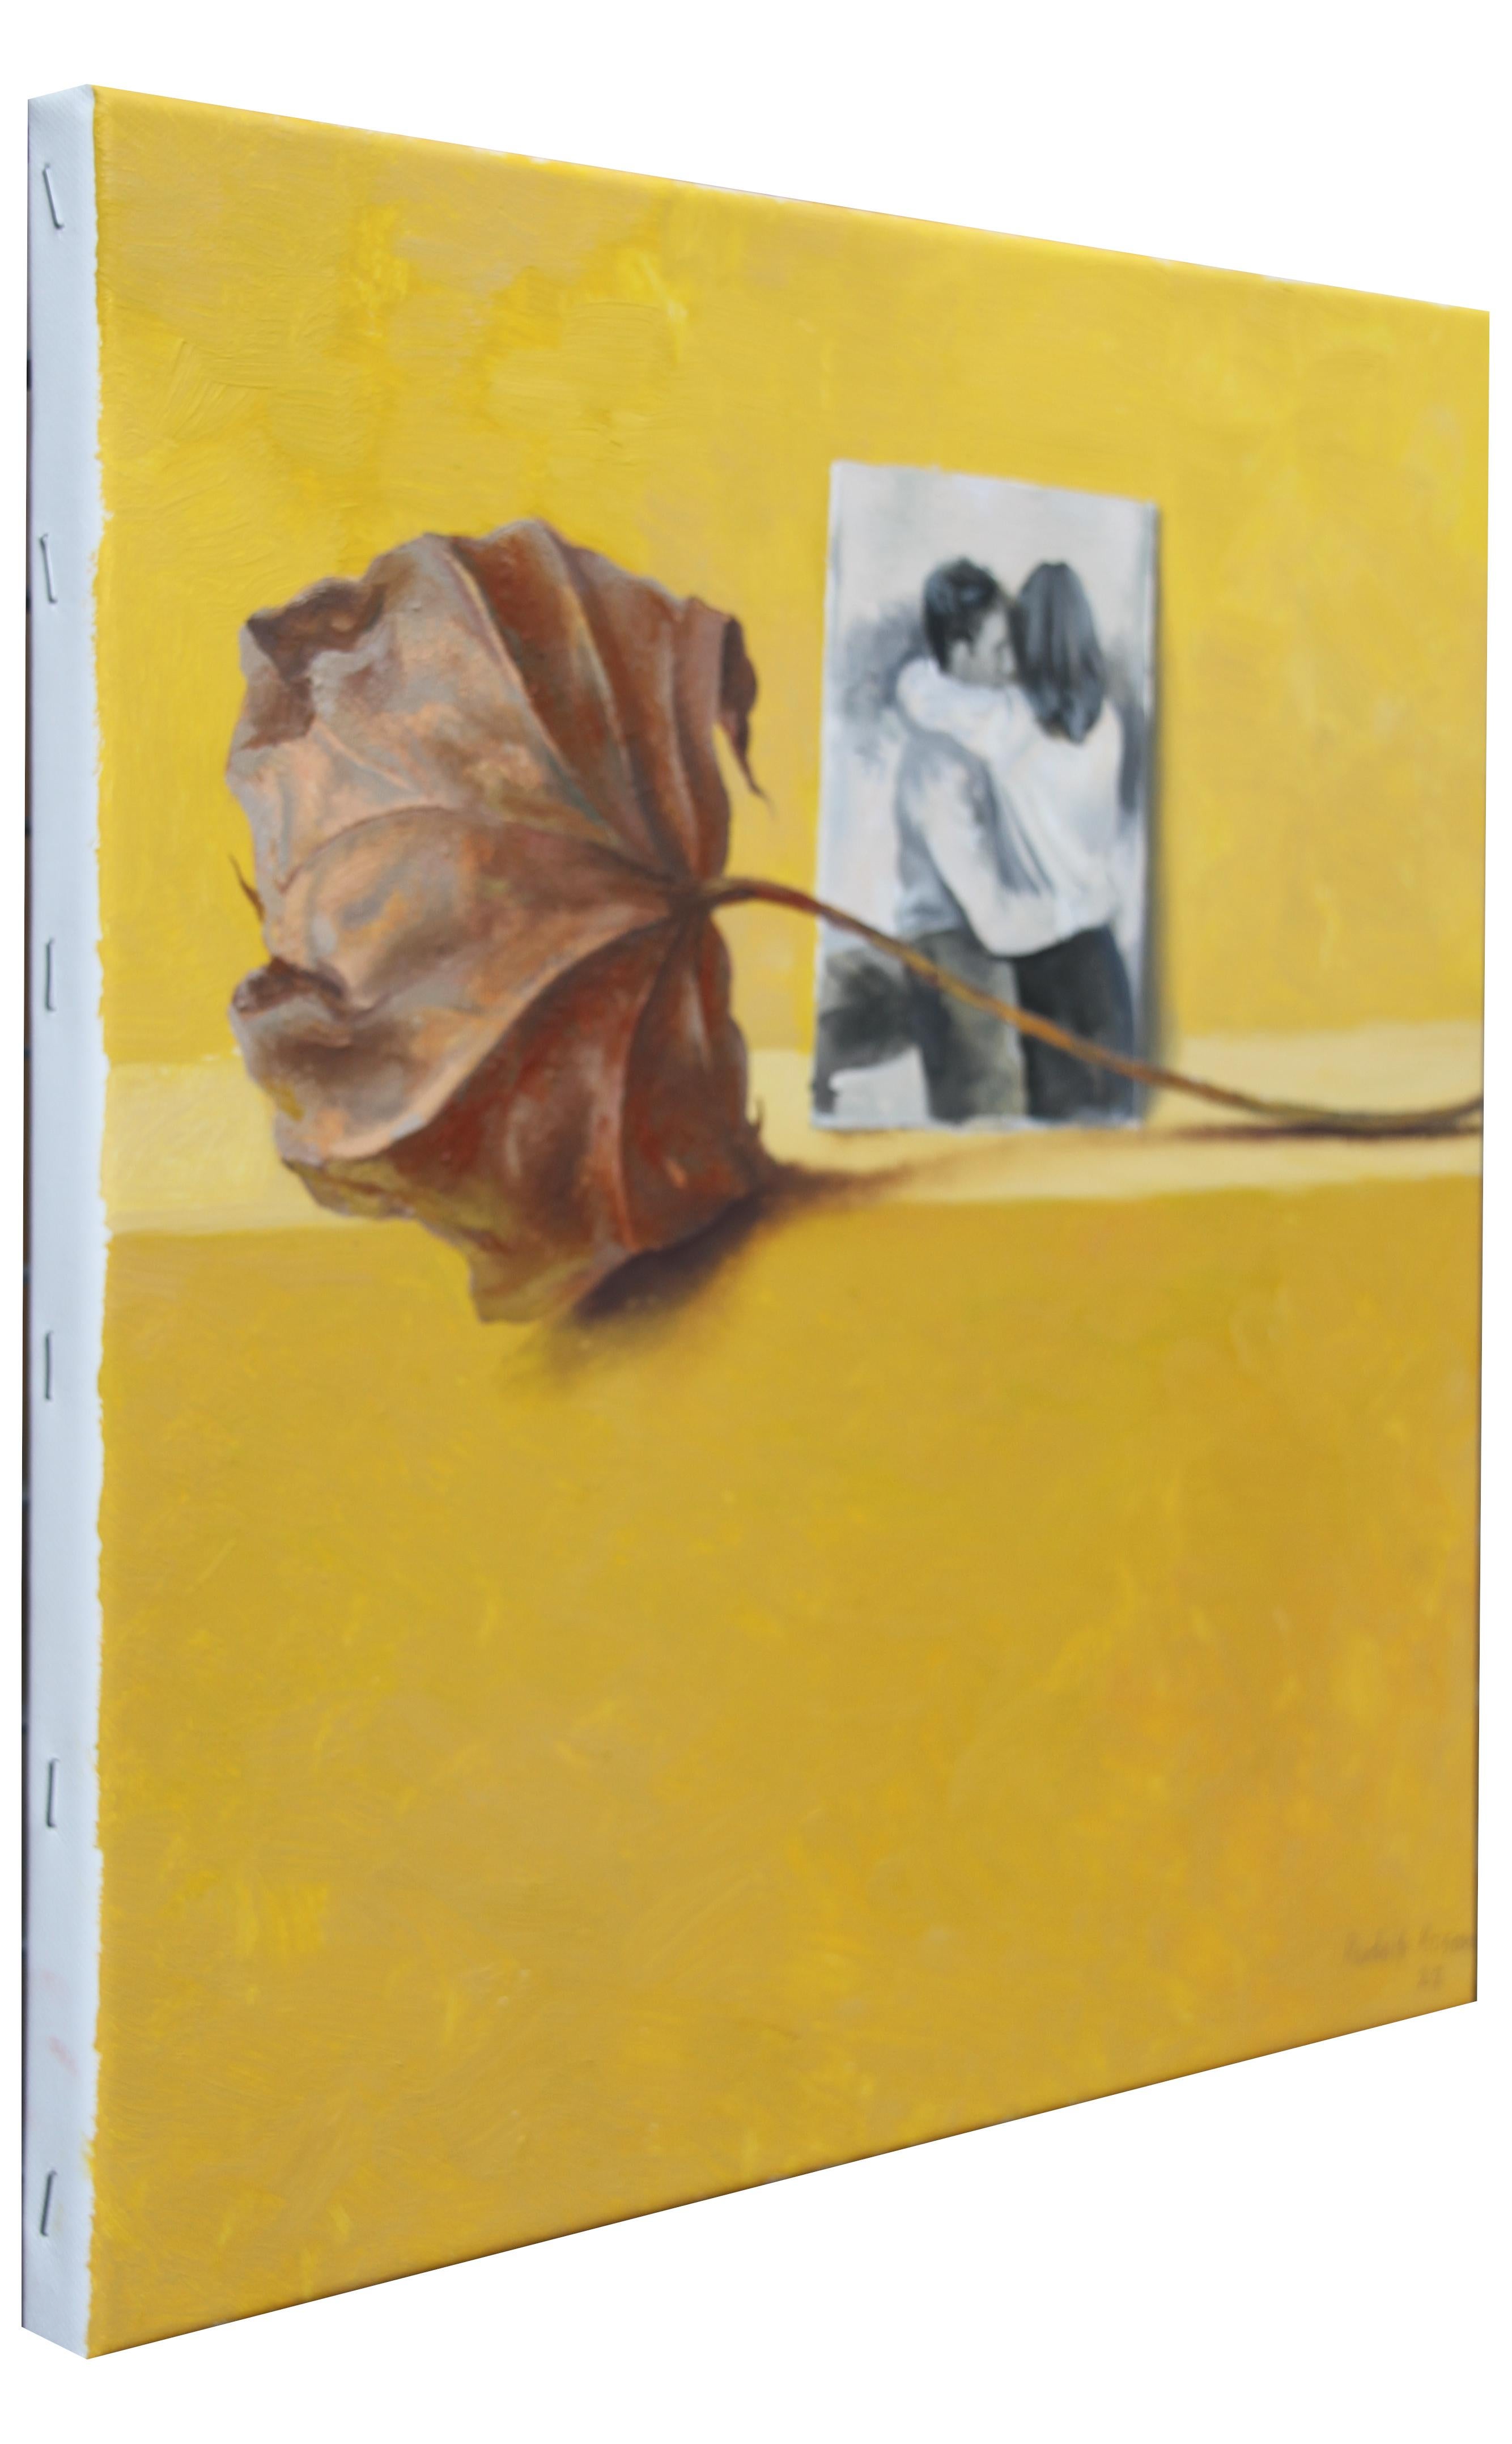  Leaf and couple (yellow oil painting vintage black and white Picture couple) - Surrealist Painting by Rudolf Kosow